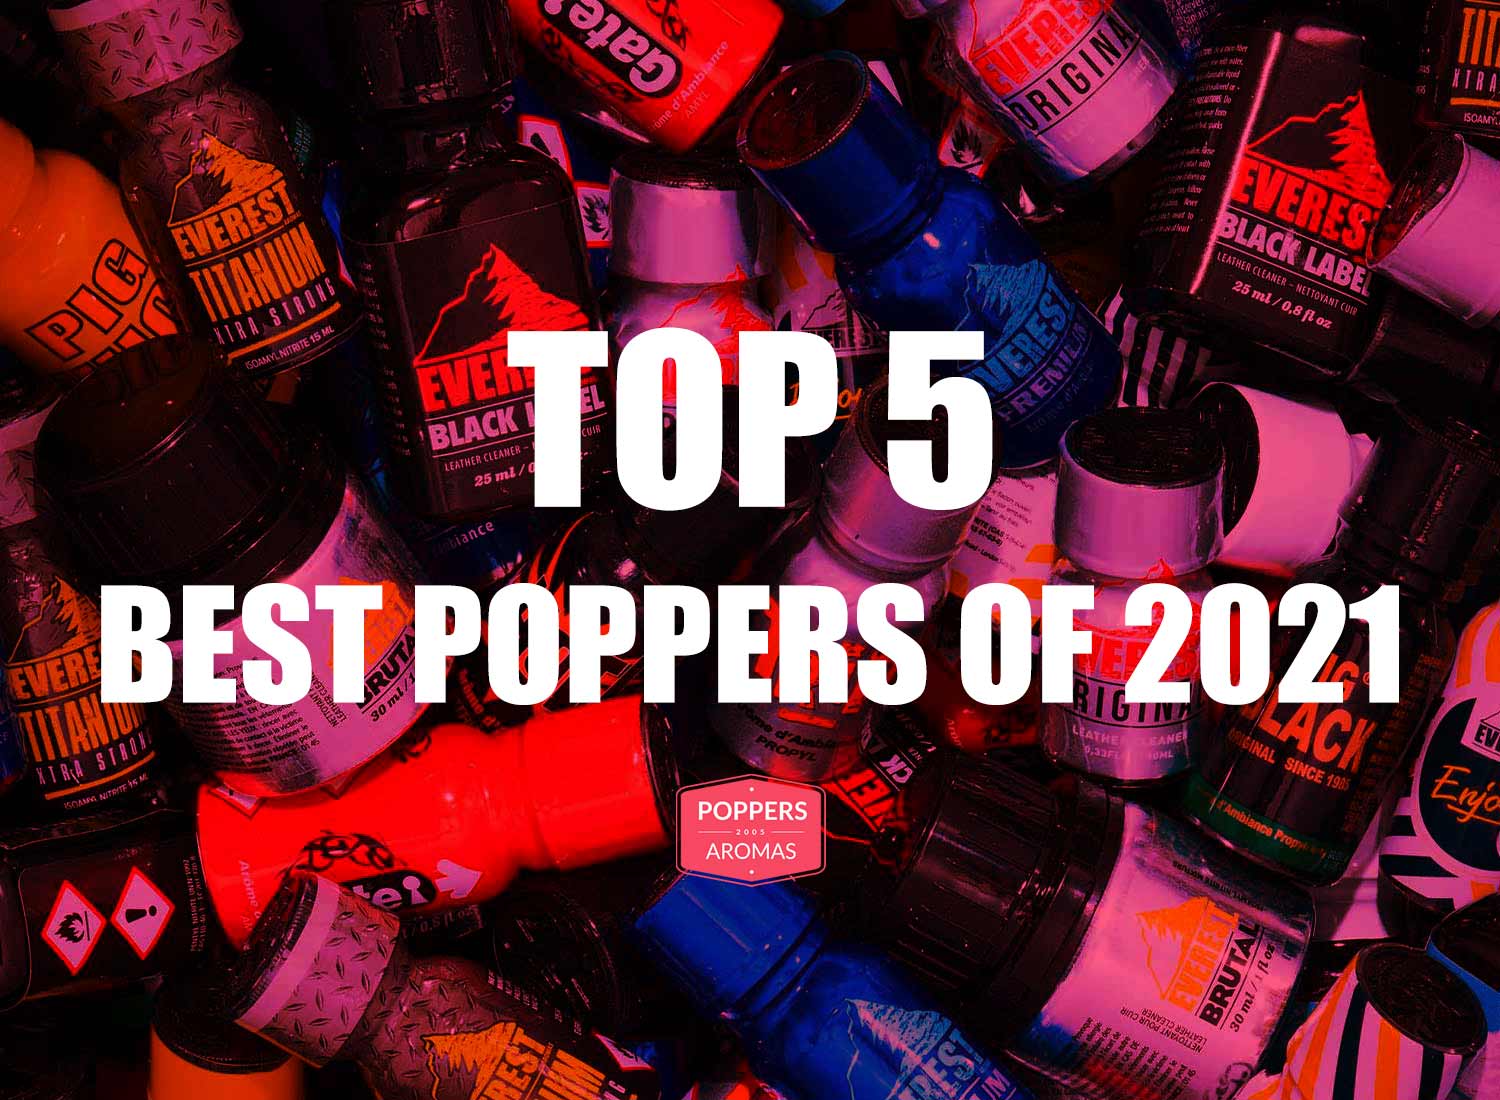 Read more about the article Top 5 Best Poppers of 2021 on Poppers Aromas